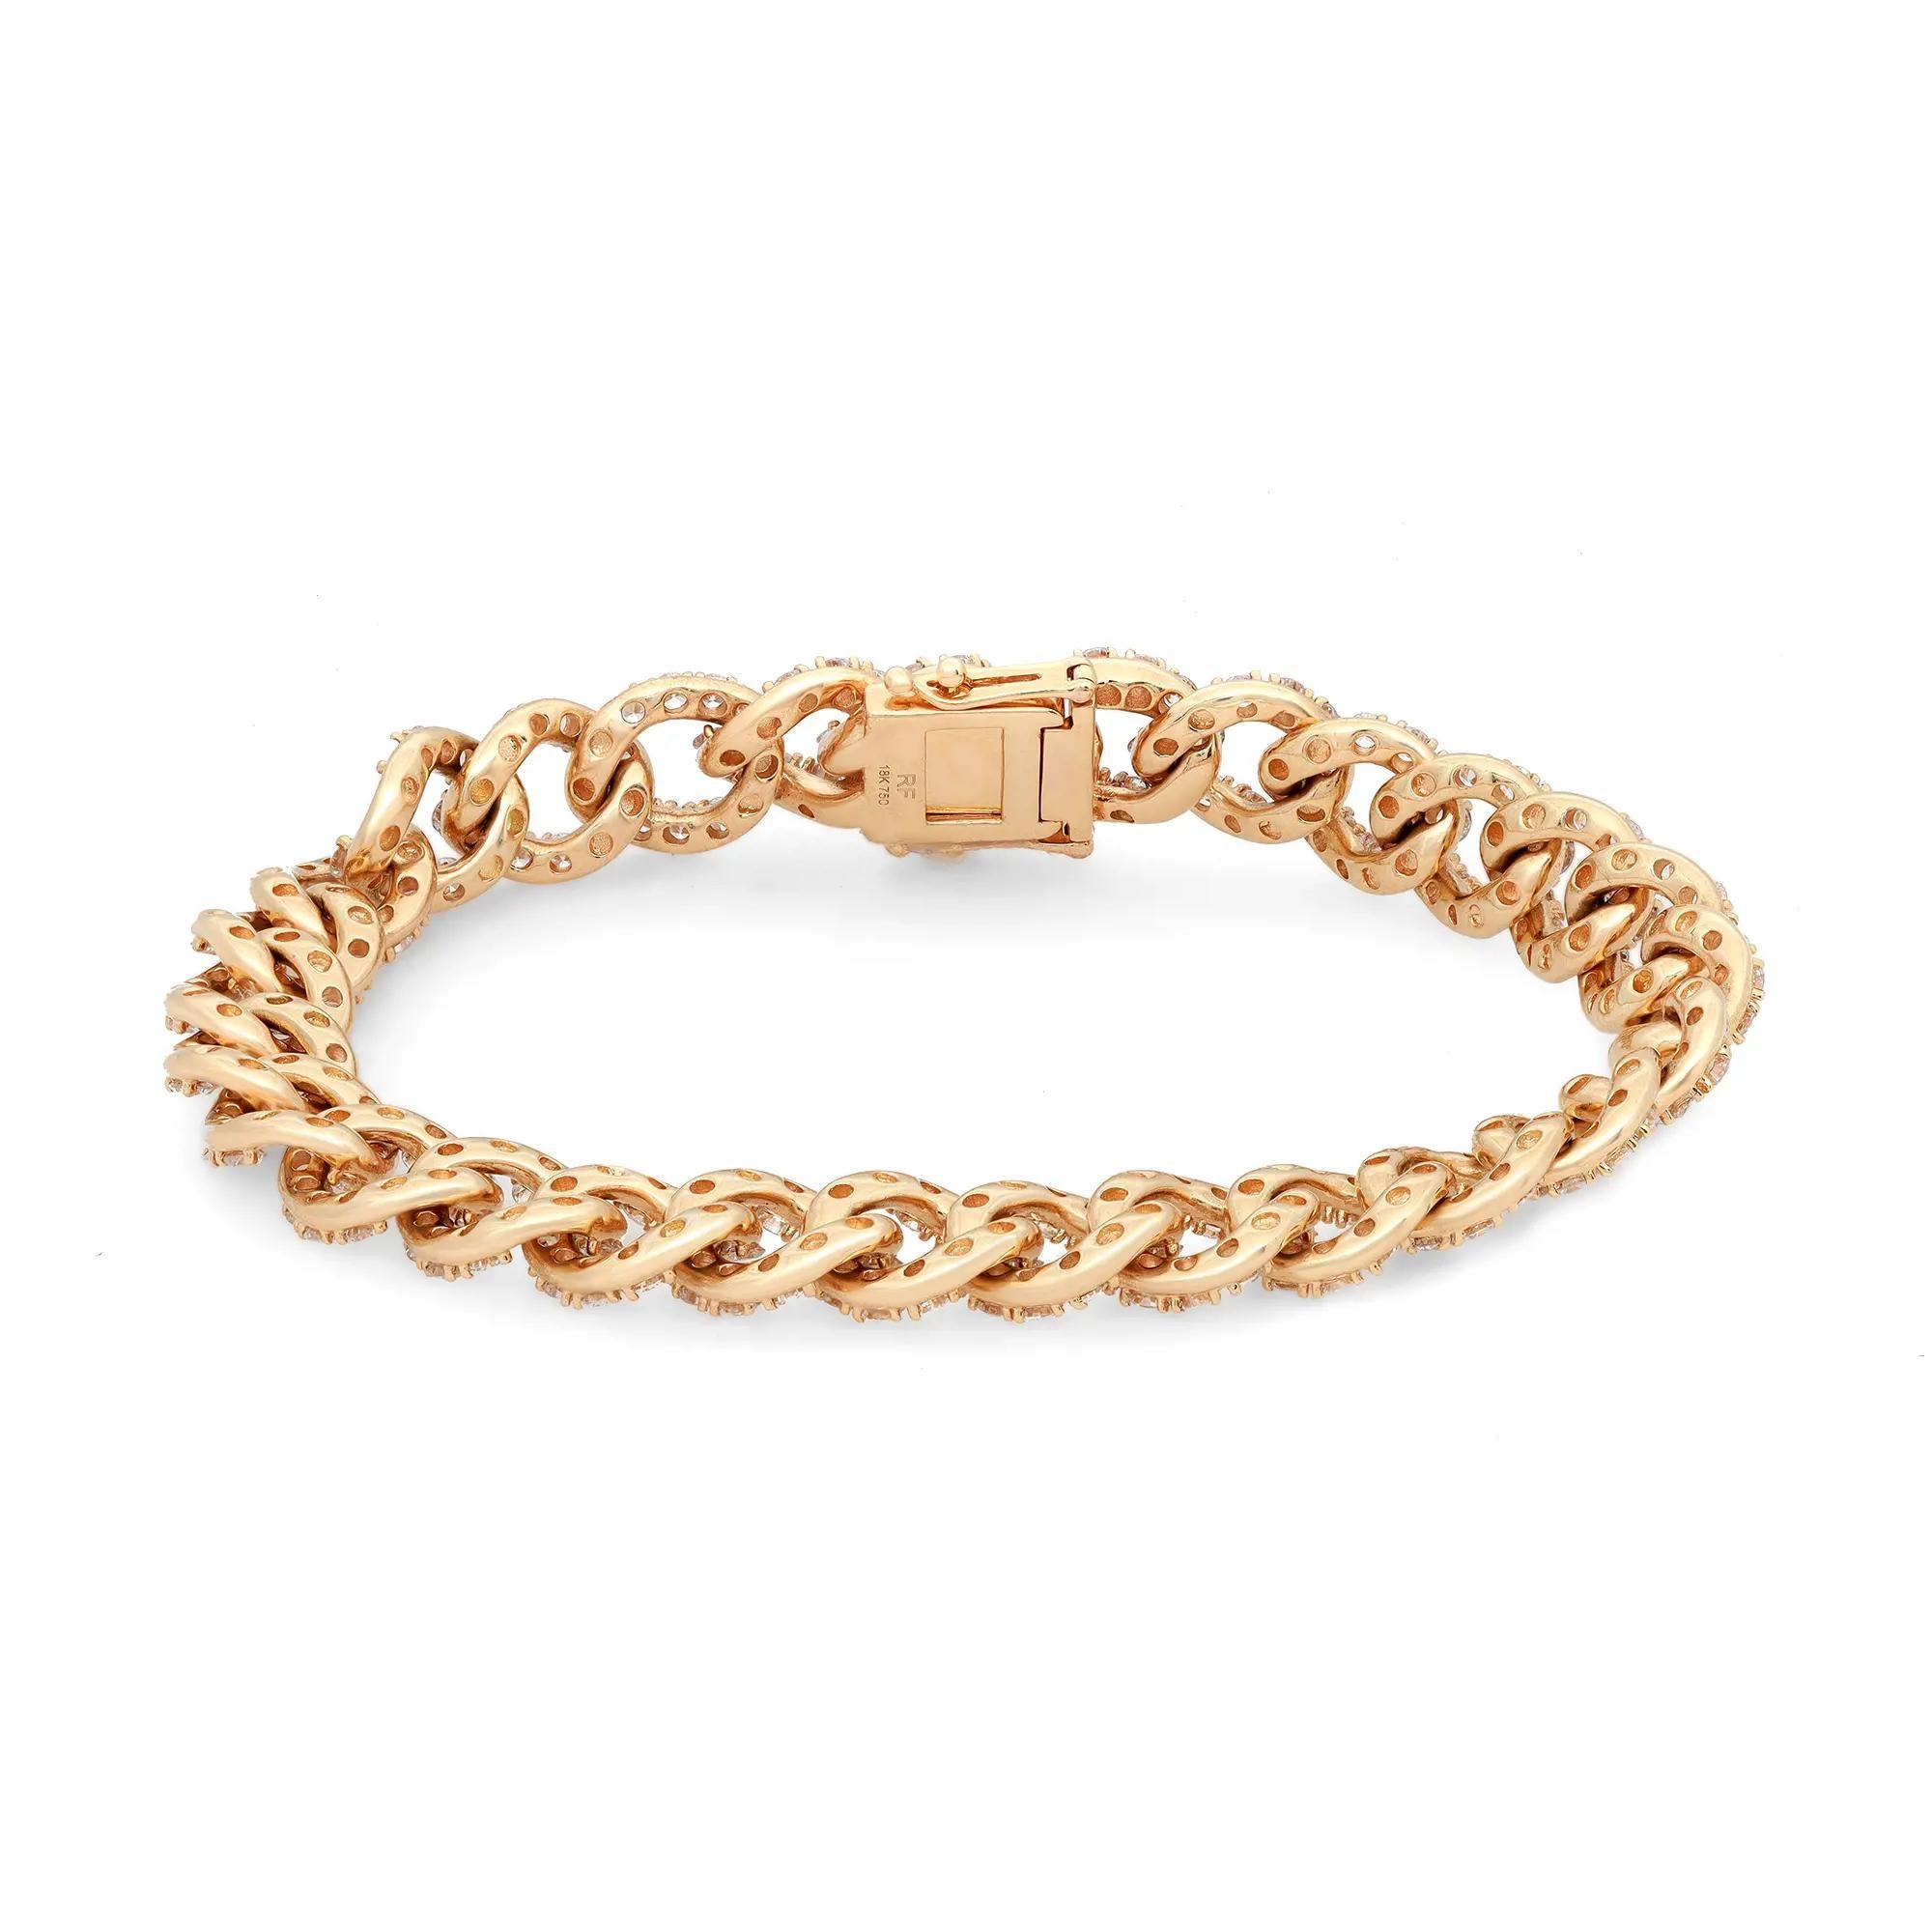 Embrace the classic Cuban link chain bracelet look with this perfect everyday wear stackable bracelet. This elegant bracelet is crafted in lustrous 18K yellow gold and features prong set round brilliant cut diamonds encrusted all over the bracelet.